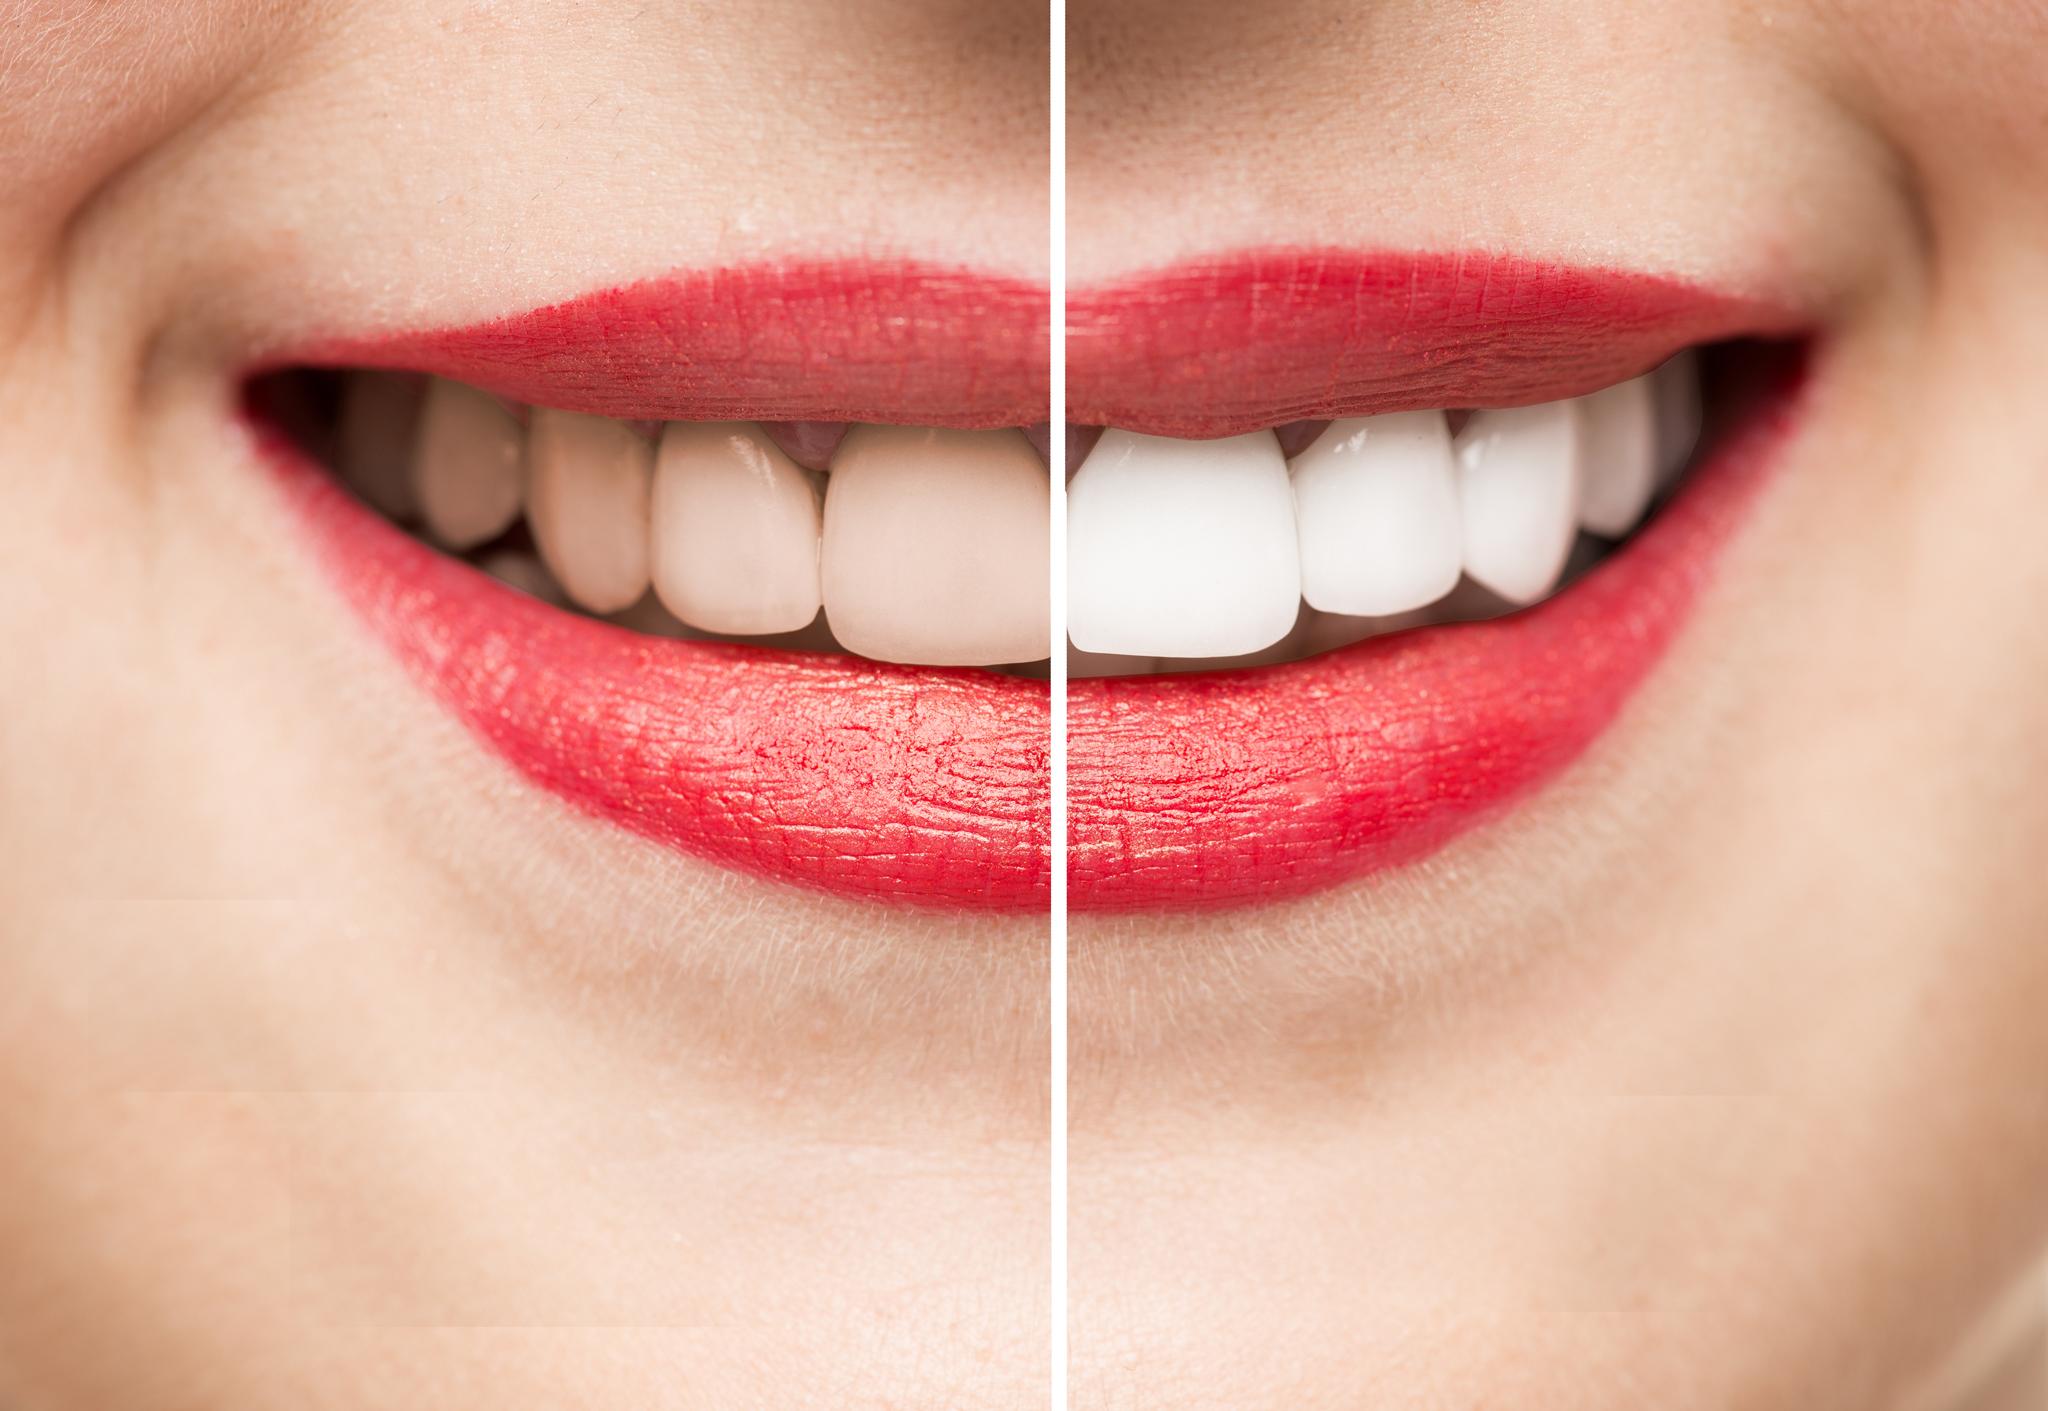 How to get whiter teeth Four top tips to help achieve a